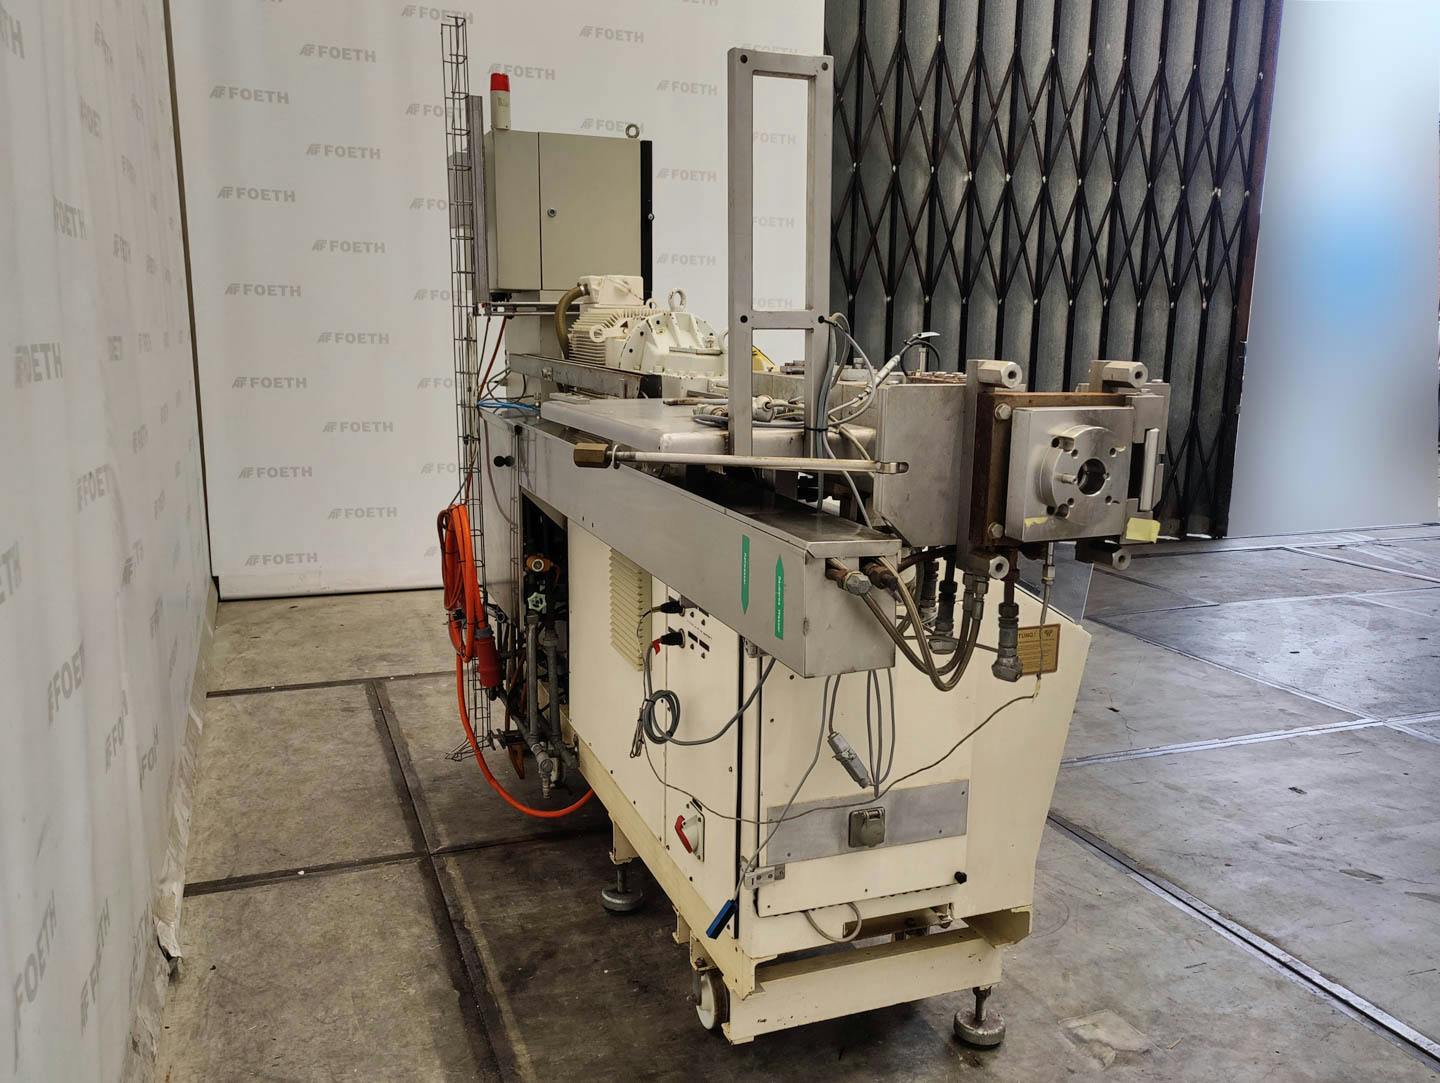 Werner & Pfleiderer Continua 37/27 D - Double screw extruder - image 6